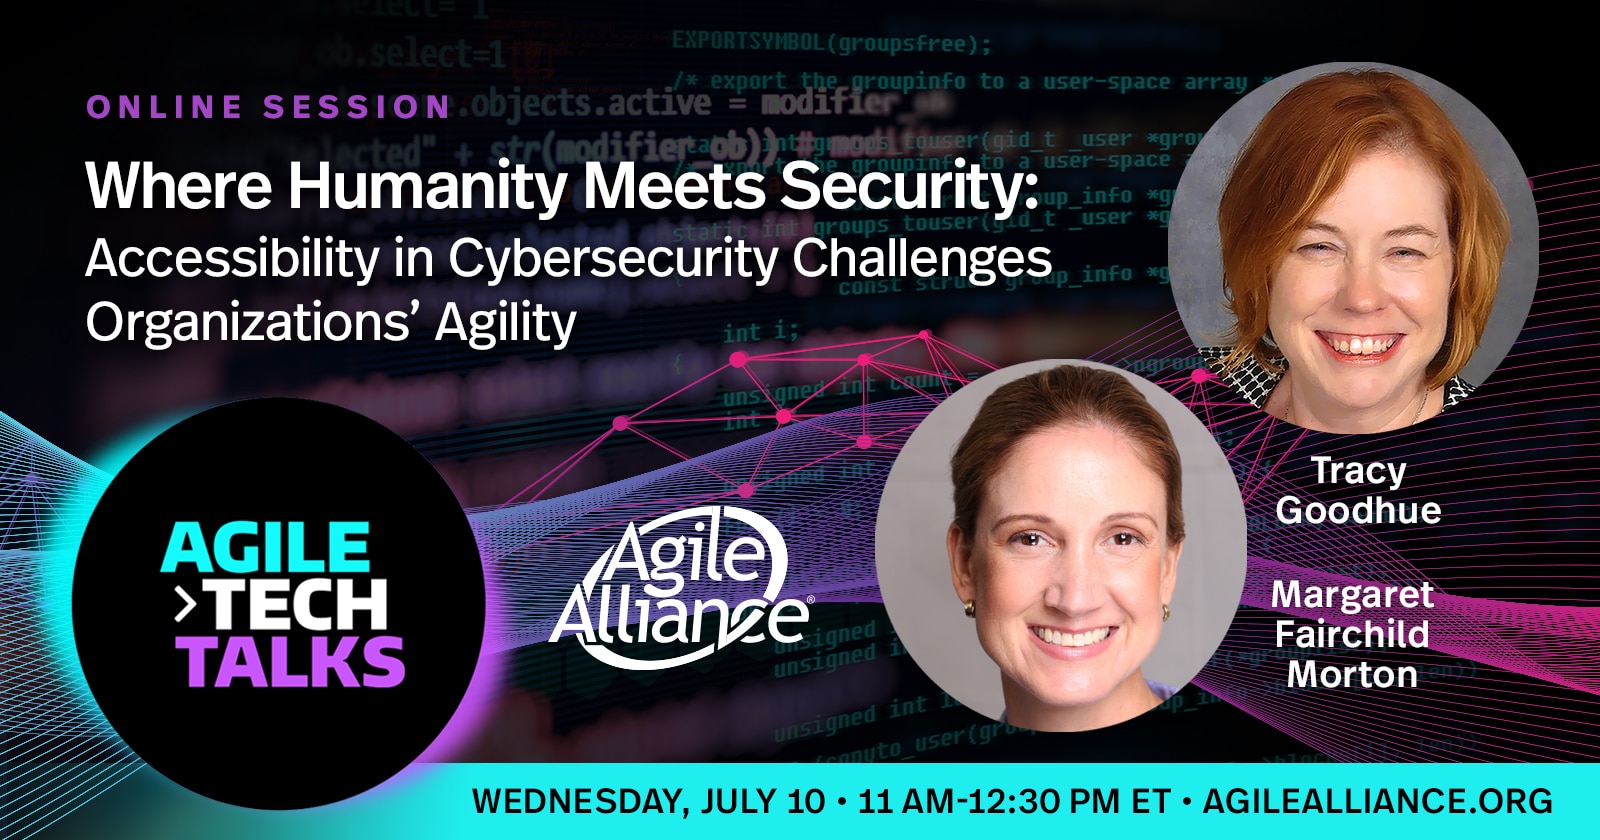 Agile Tech Talks – "Where Humanity Meets Security: Accessibility in Cybersecurity Challenges Organizations Agility"